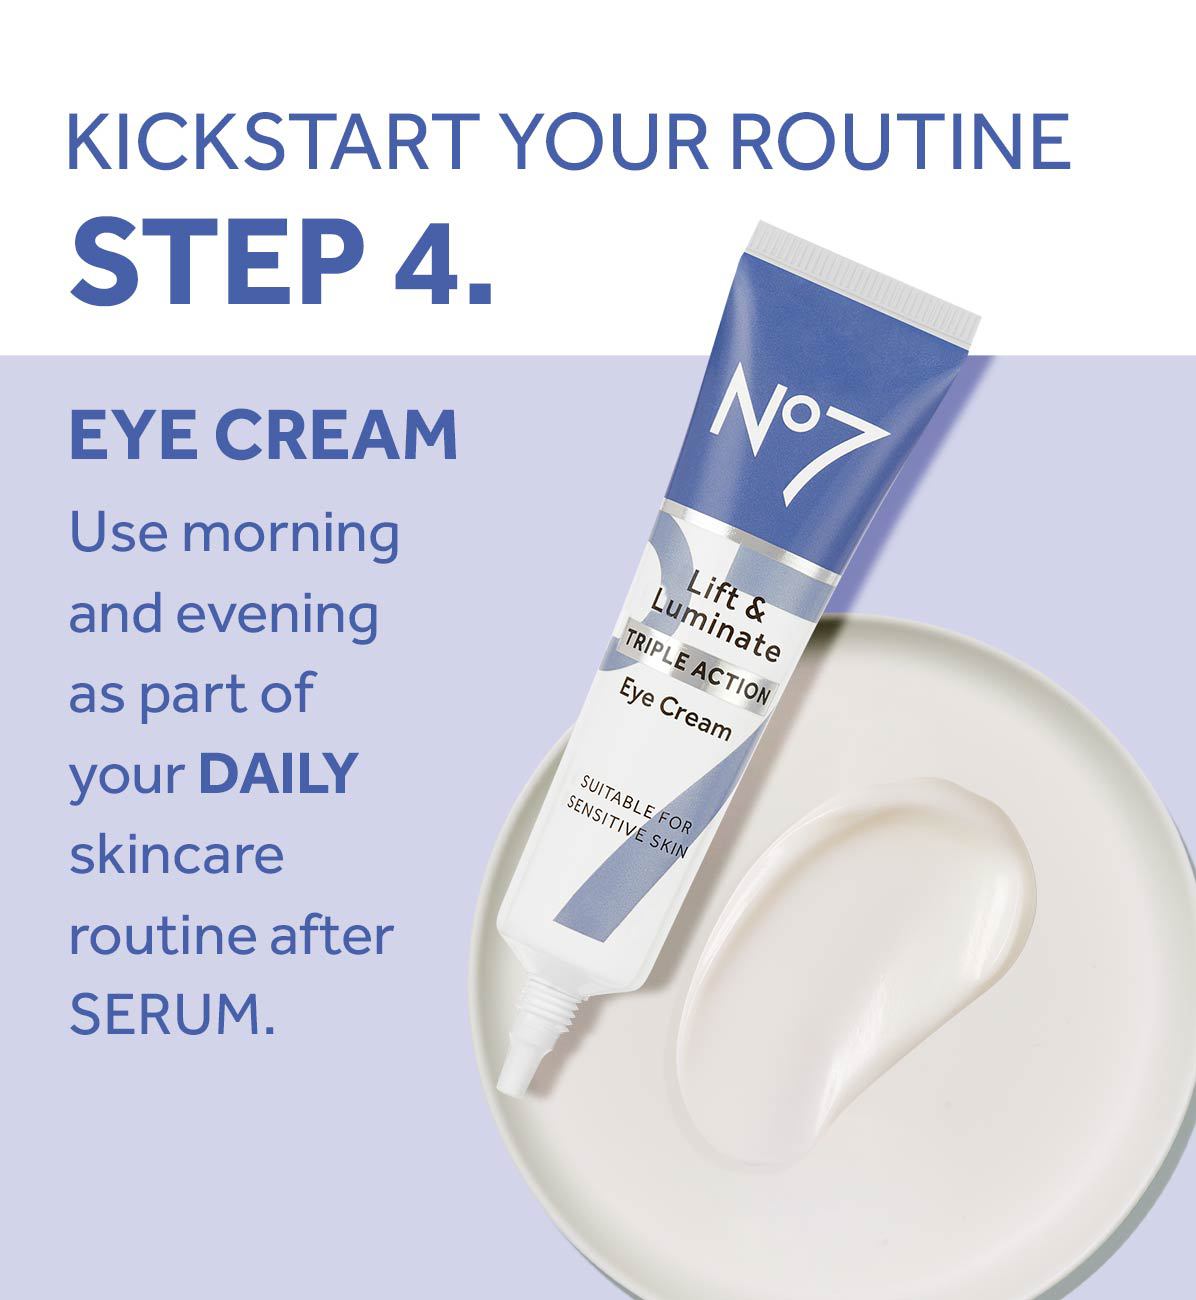 KICKSTART YOUR ROUTINESTEP 4.EYE CREAMUse morning and evening as part of your DAILY skincare routine afterSERUM.